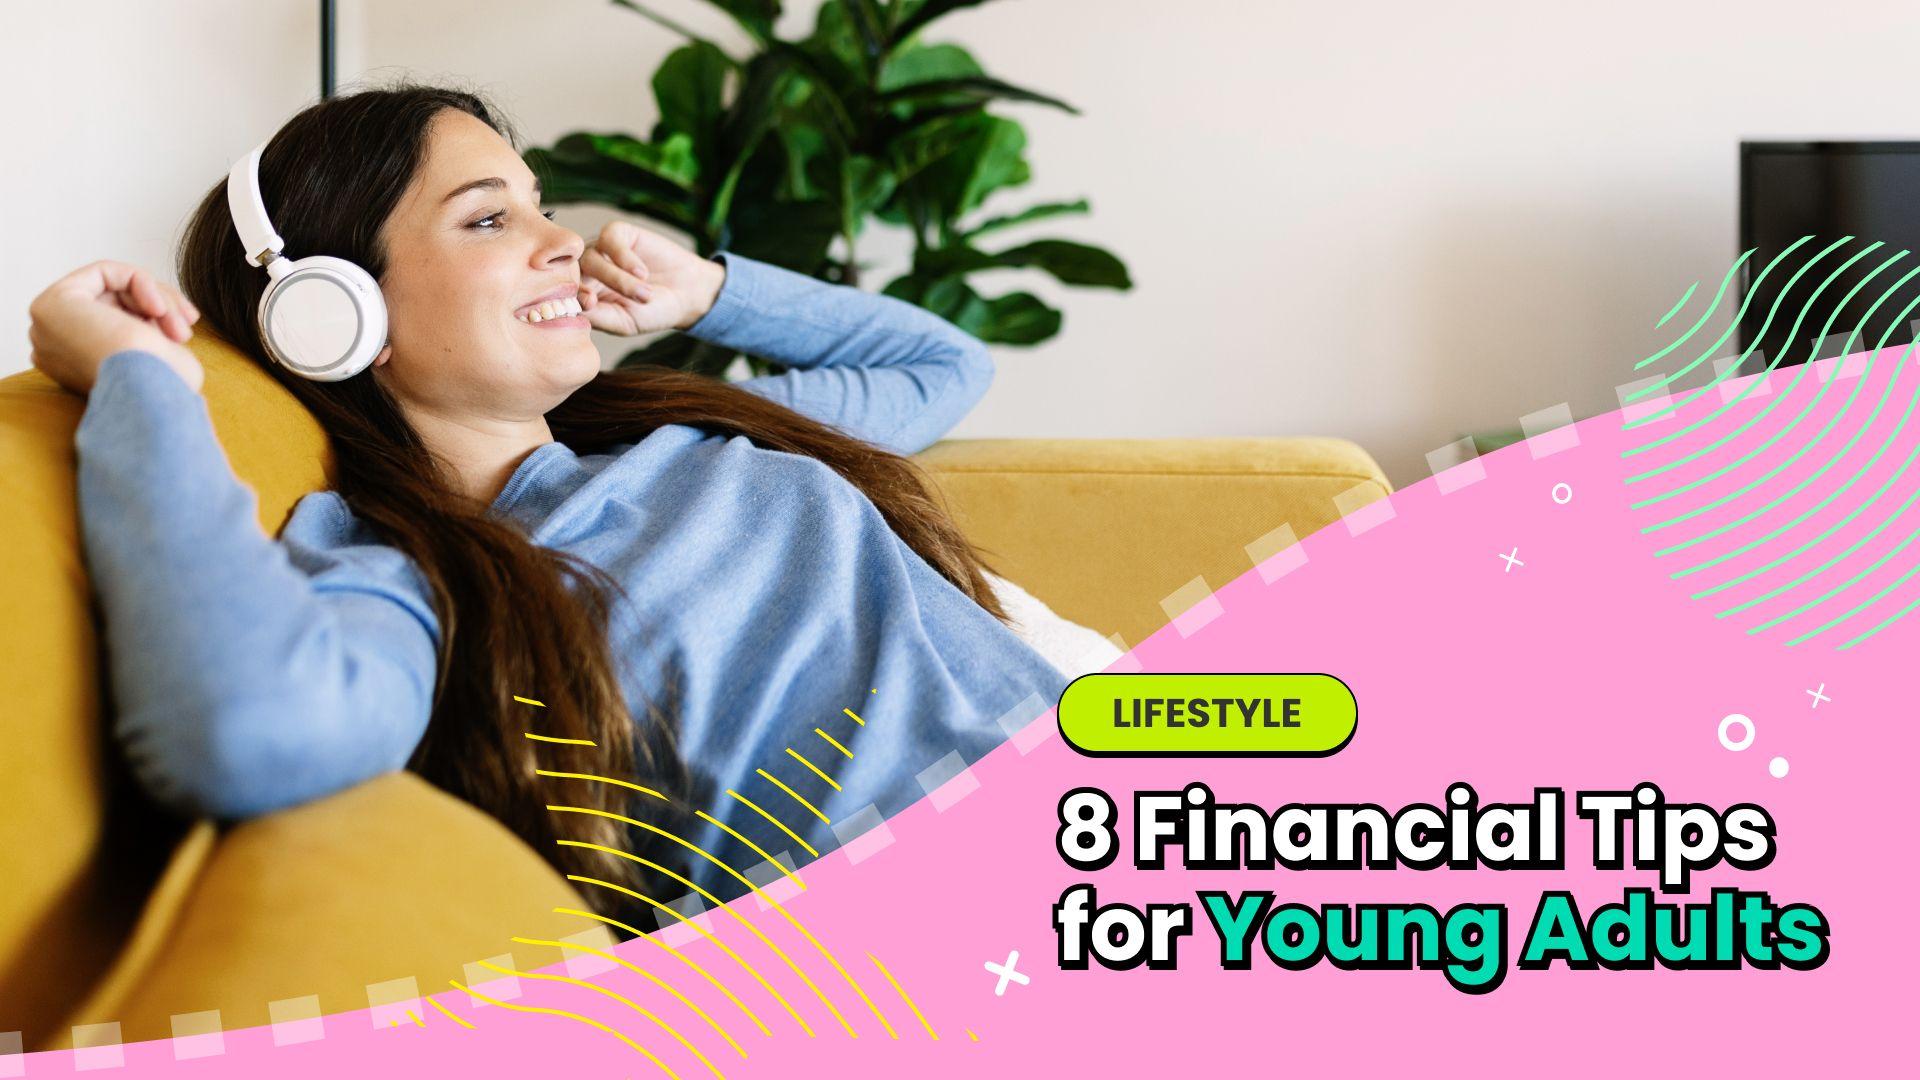 8 Financial Tips for Young Adults (1).jpg